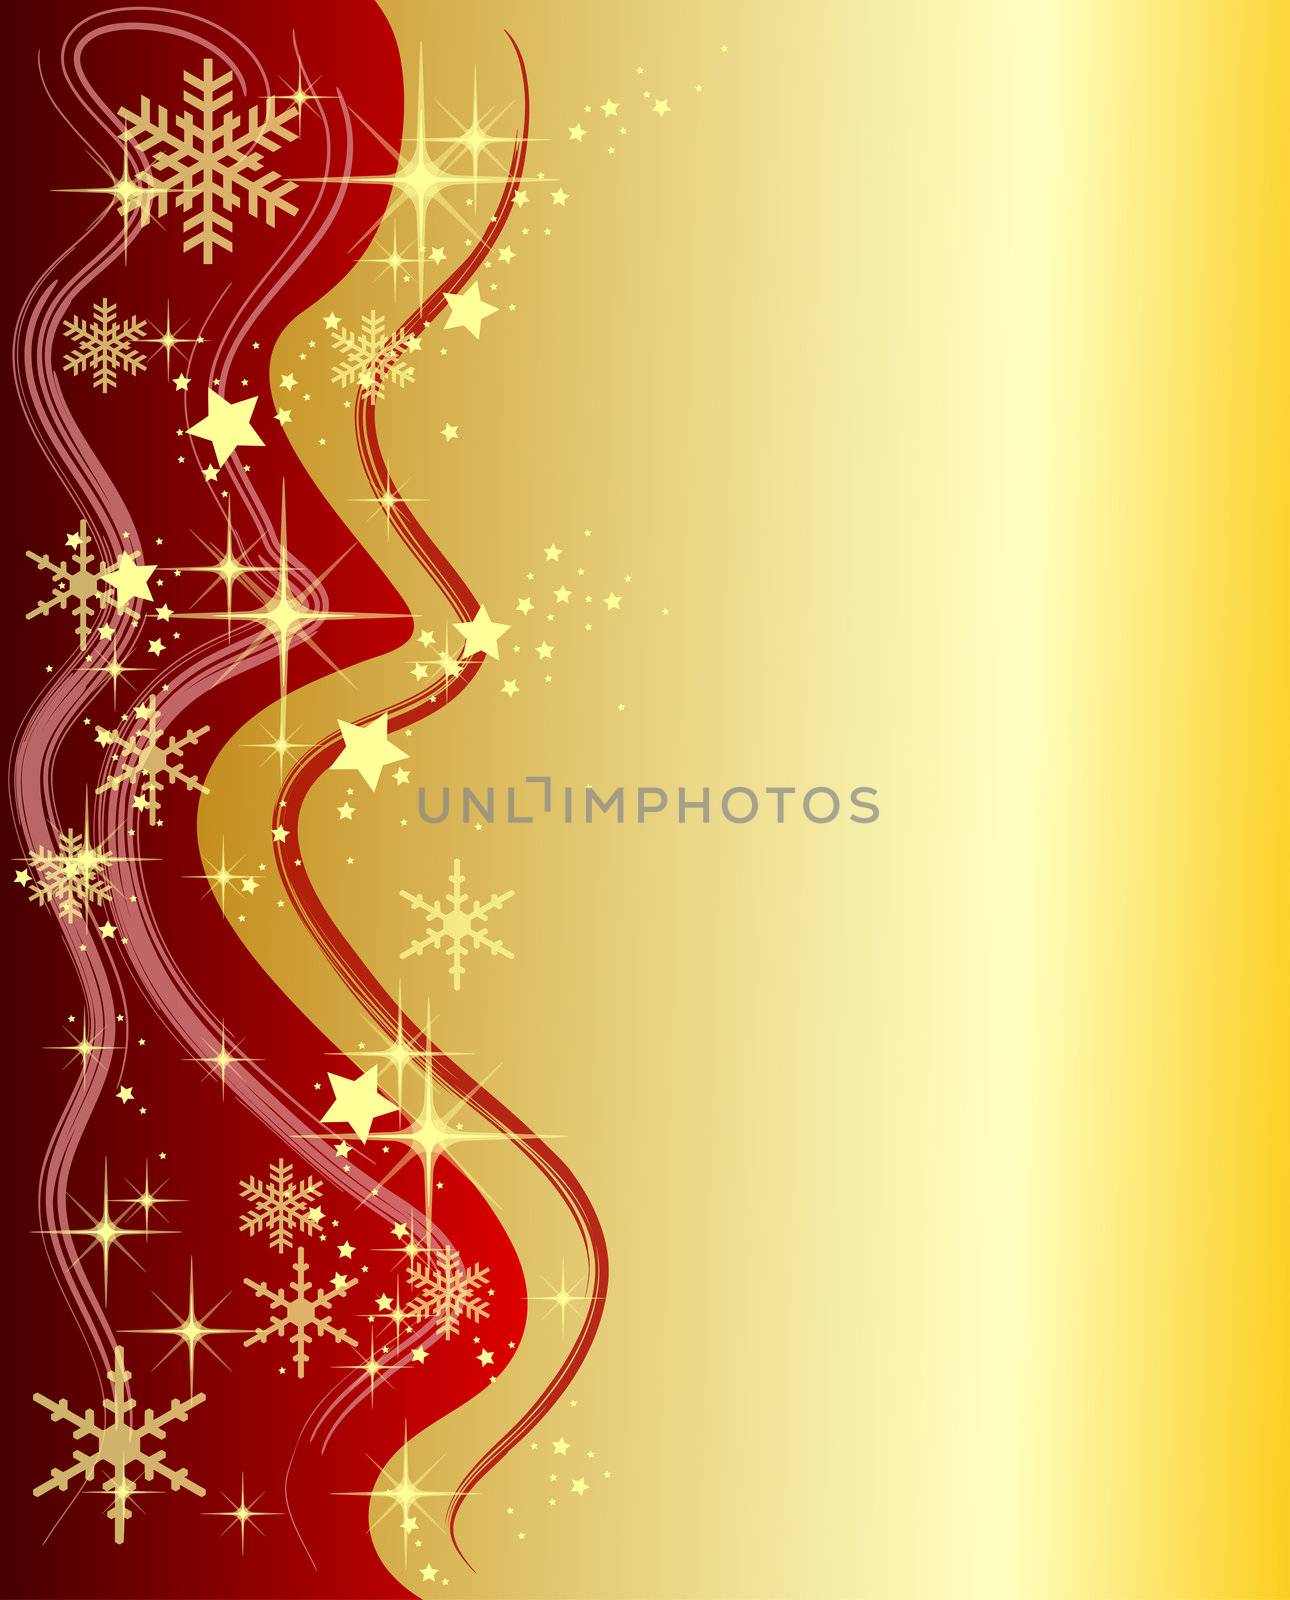 Illustration of a golden Christmas Background with Stars by peromarketing